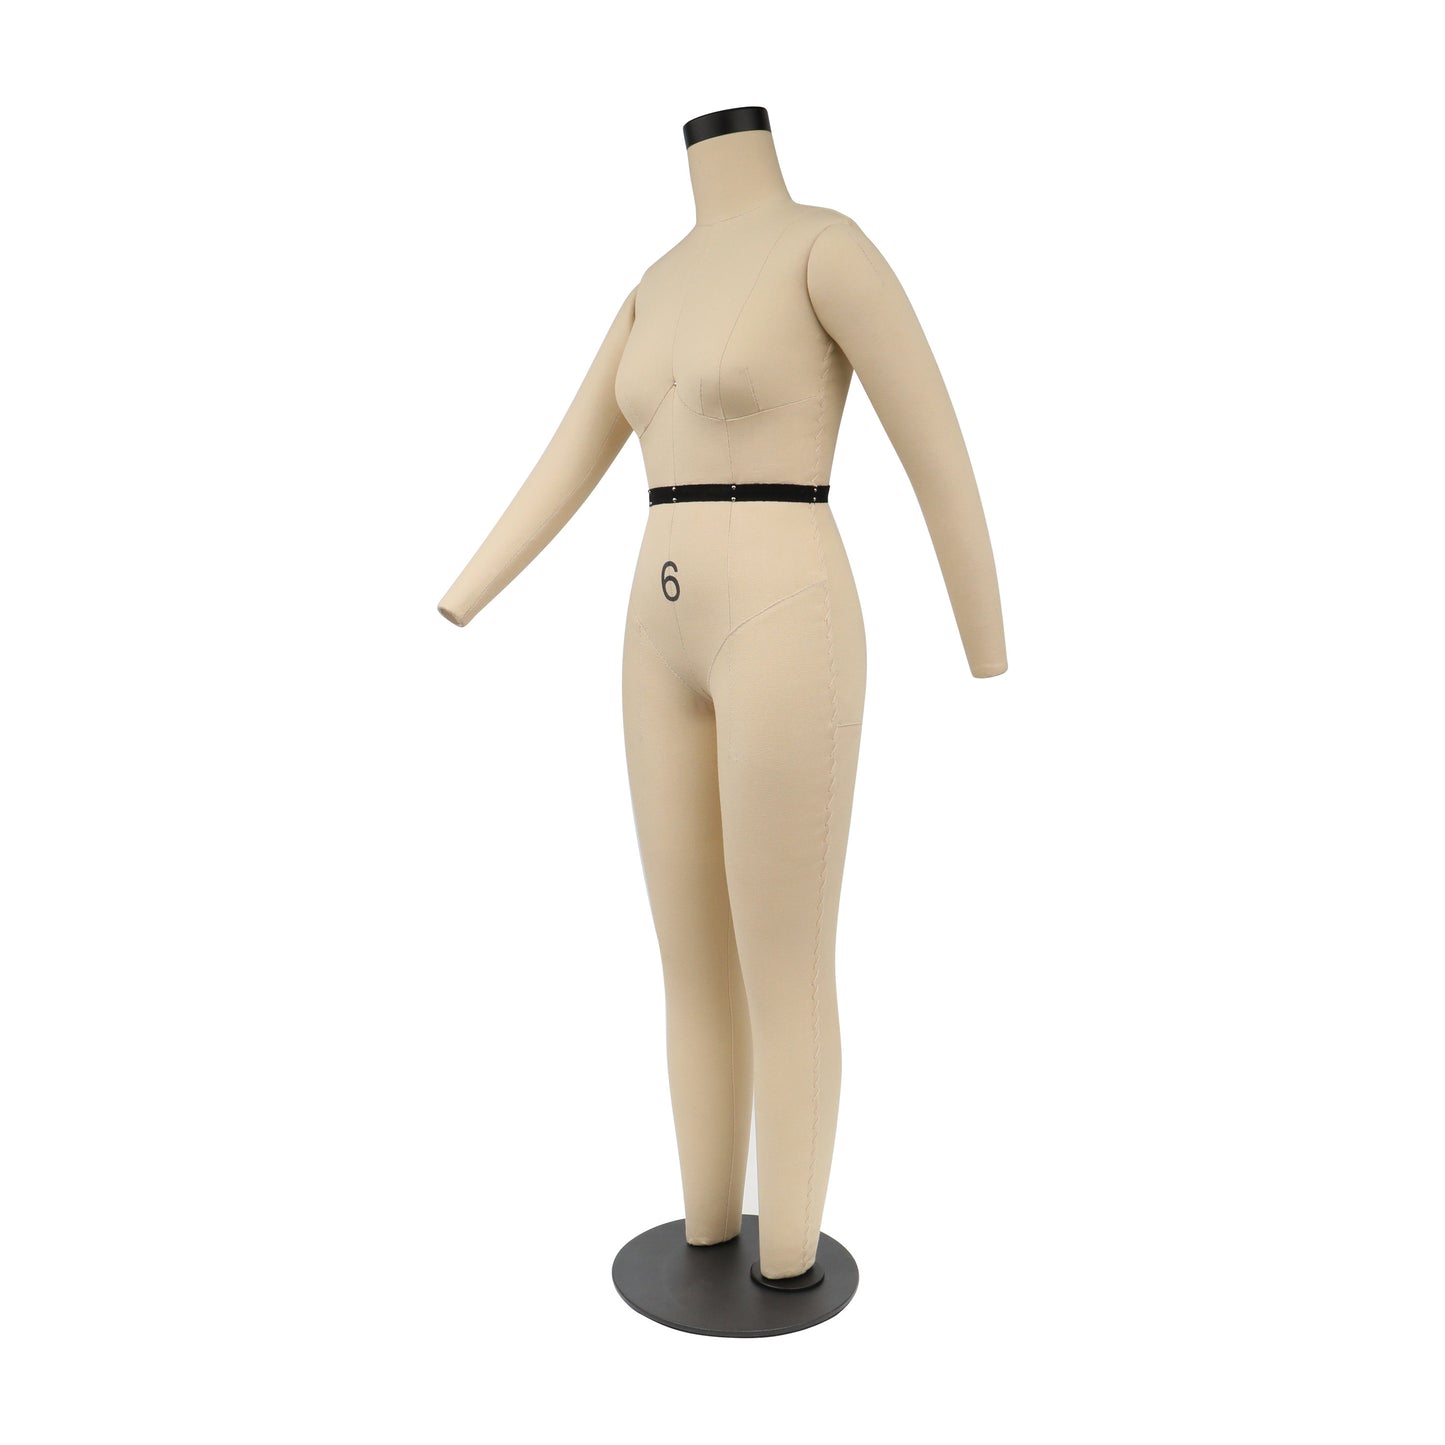 Jelimate US Size 6 Female Half Scale Dress Form For Sewing,Women Half Size Mannequin Full Body,1/2 scale Tailor Mannequin with Detachable Arms Dressmaker Dummy